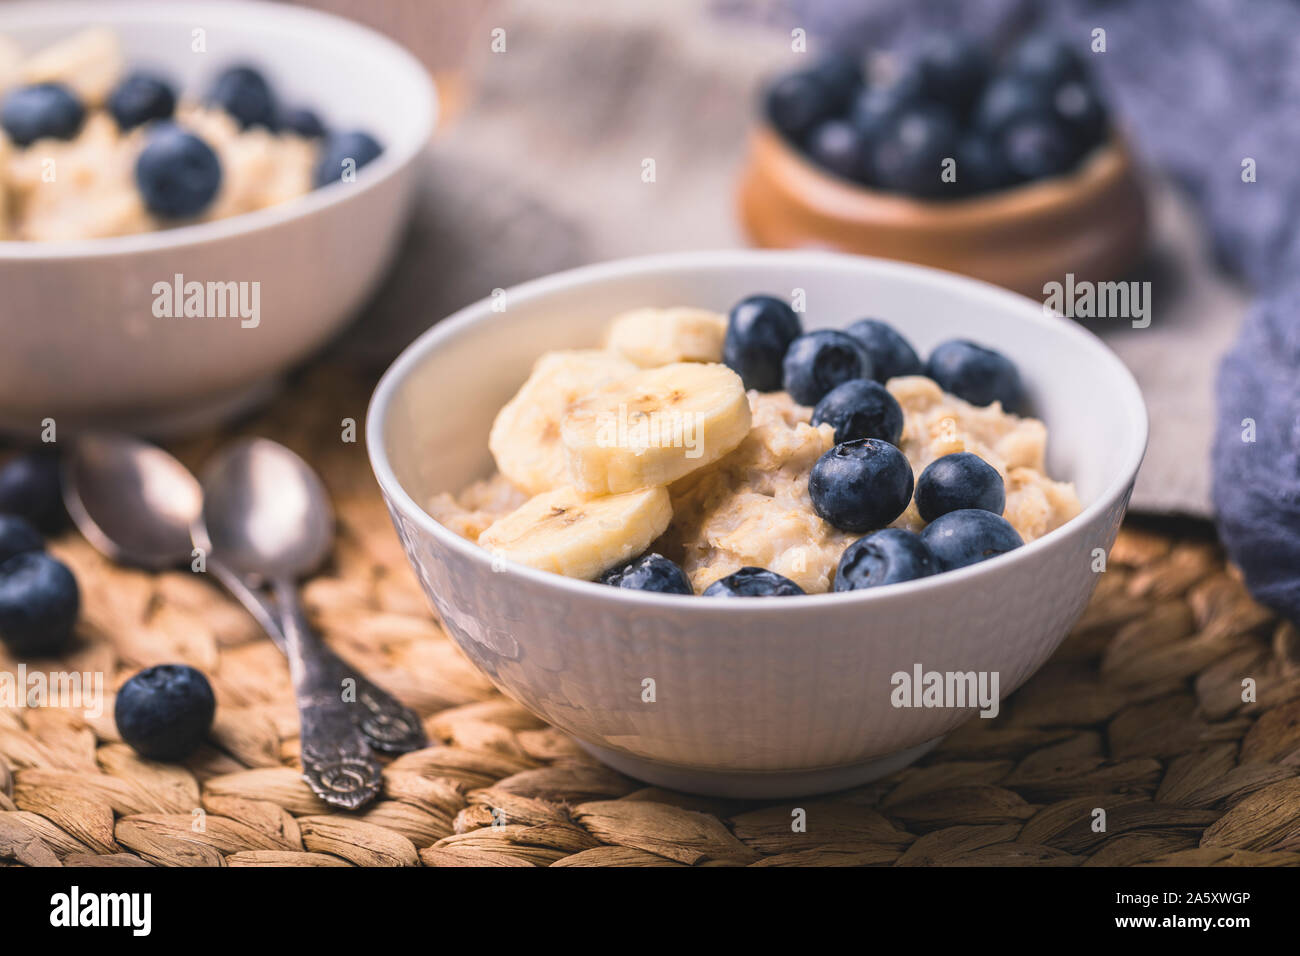 Healthy oatmeal porridge breakfast with fresh blueberries and sliced bananas. There are two bowls in the photo, one partly out of the frame, and two v Stock Photo